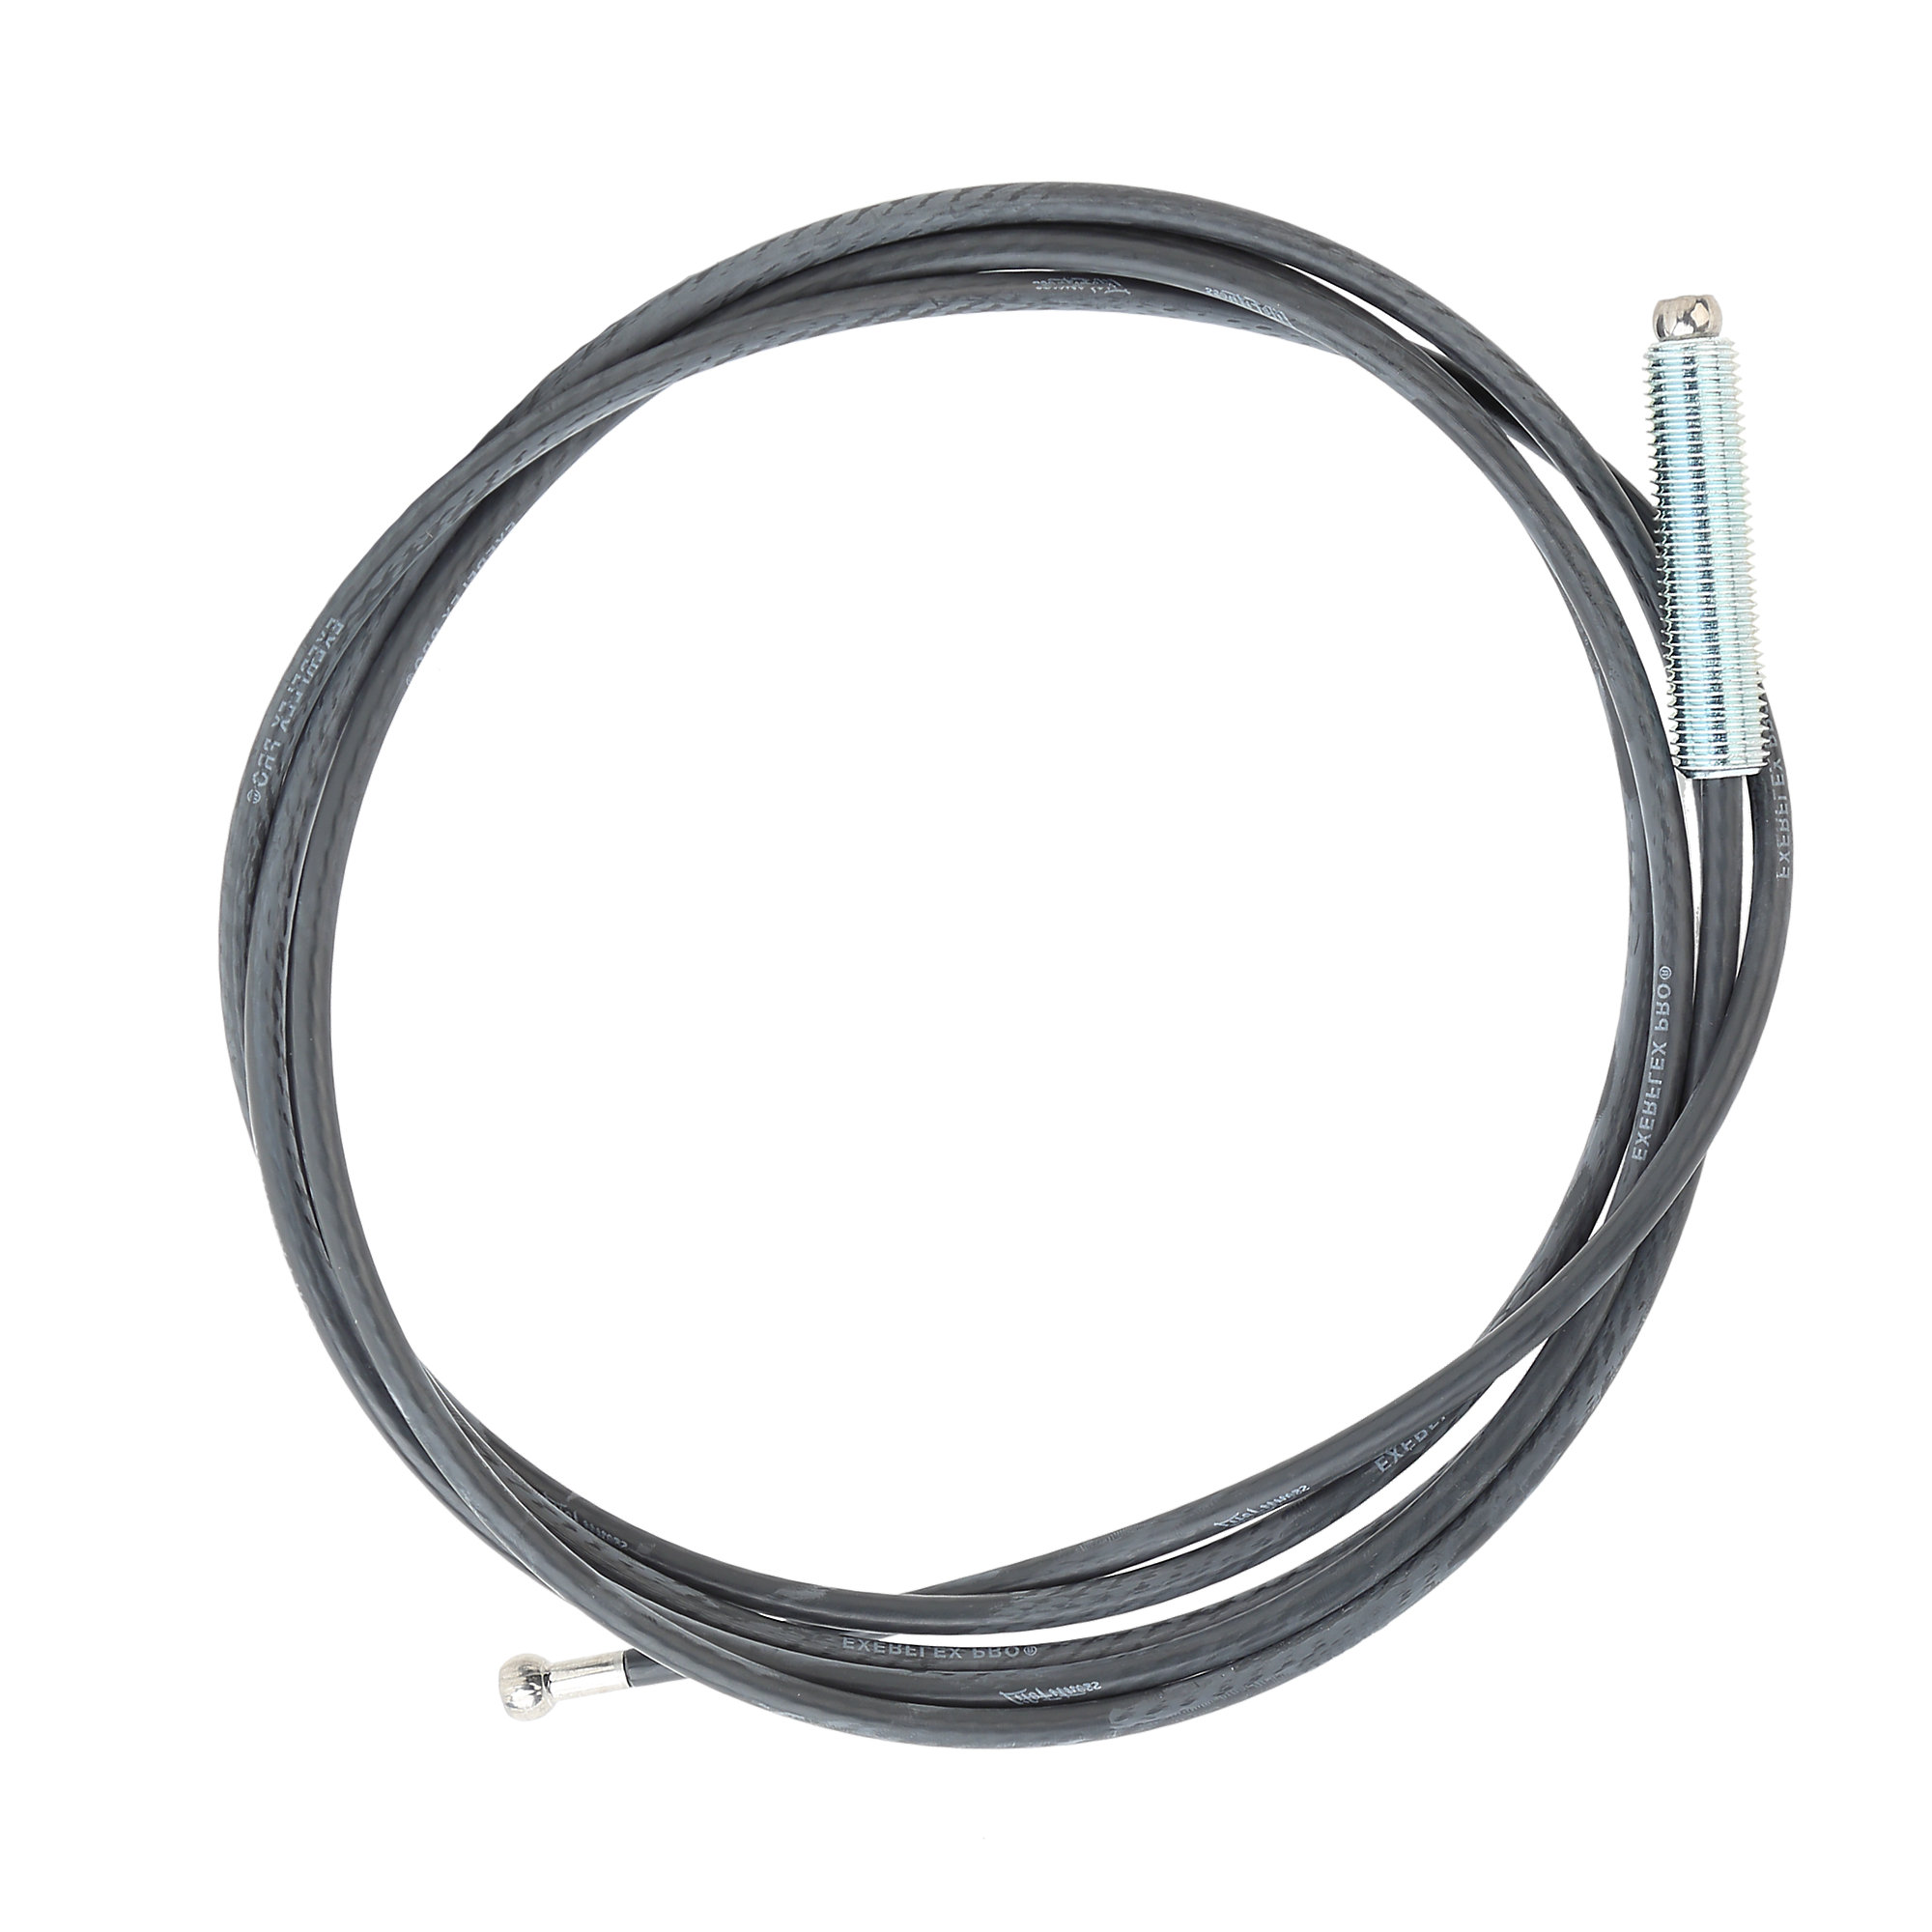 Cable FZAB 123-1/4